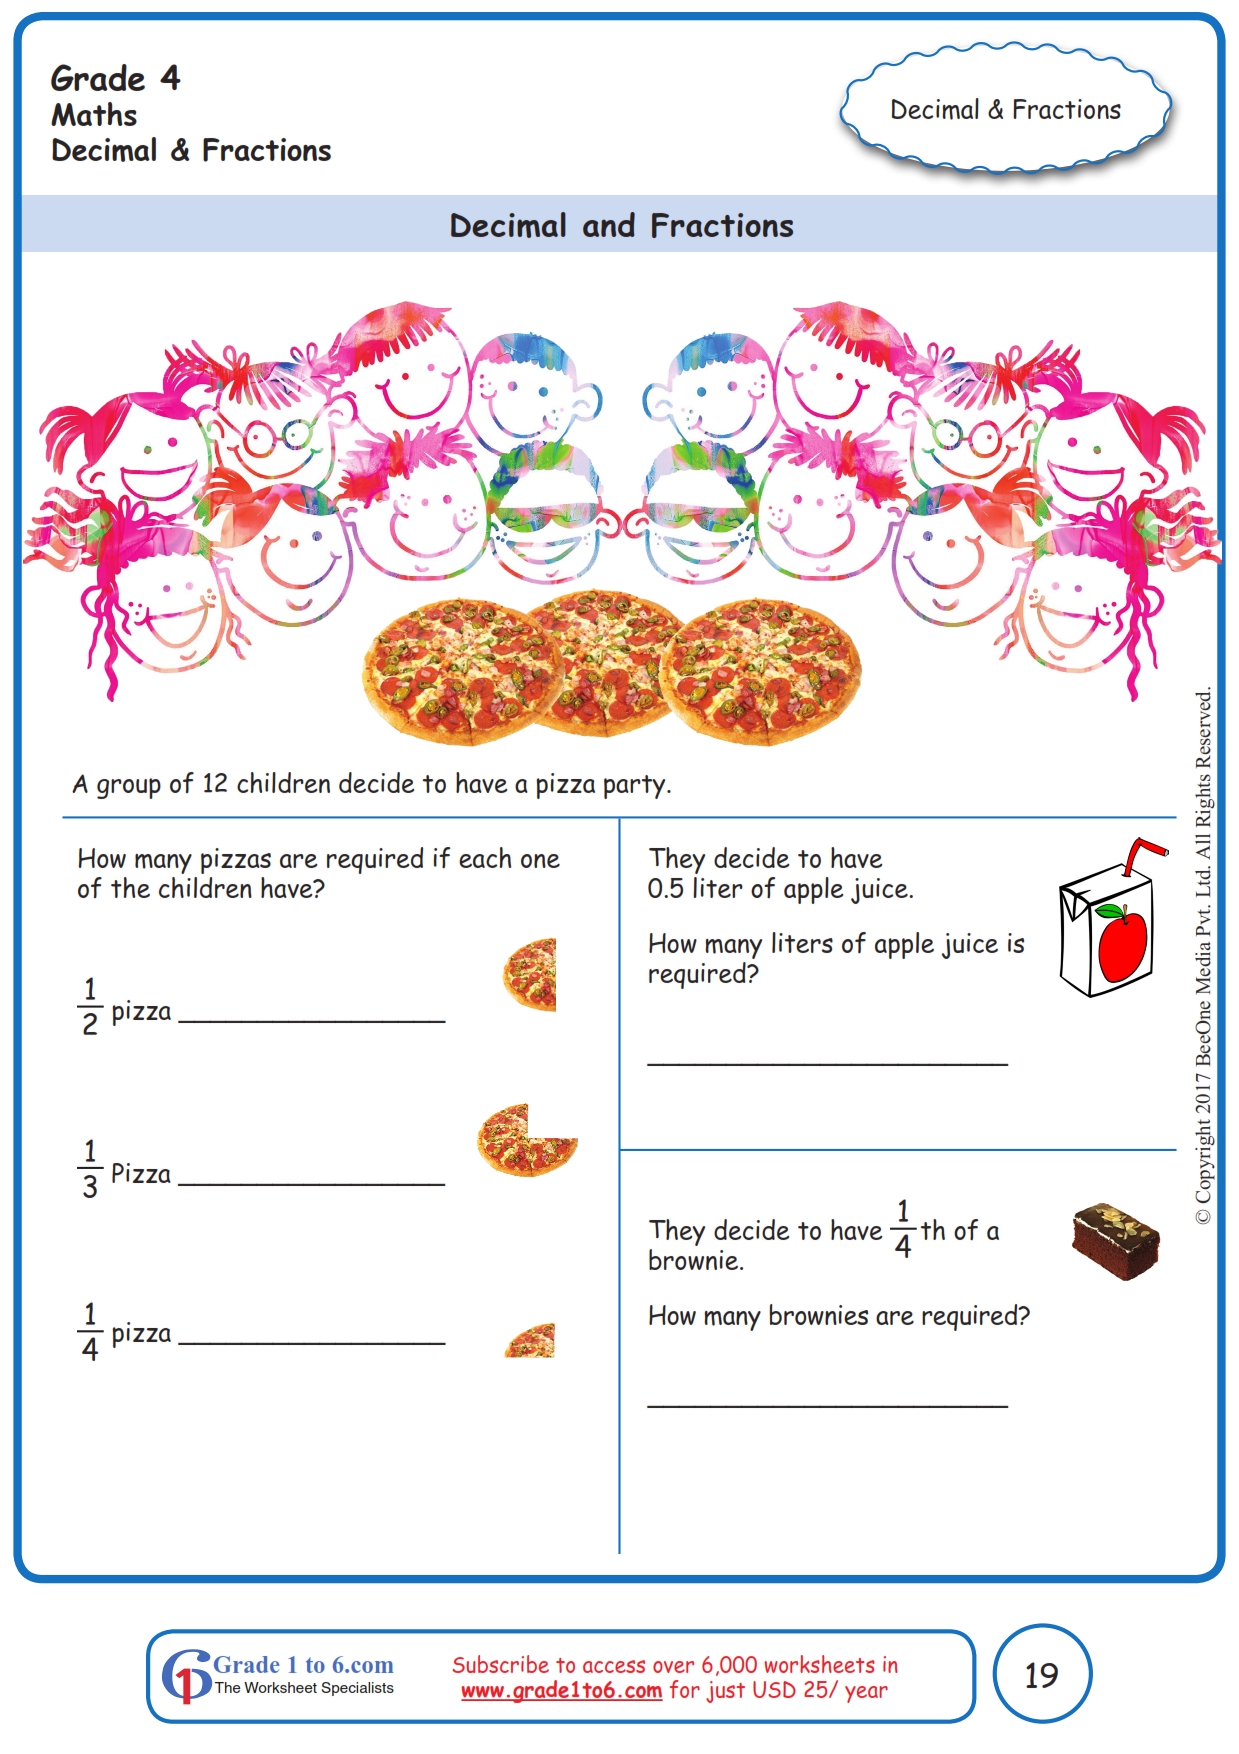 grade-5-fractions-worksheets-convert-decimals-to-mixed-numbers-k5-learning-grade-5-math